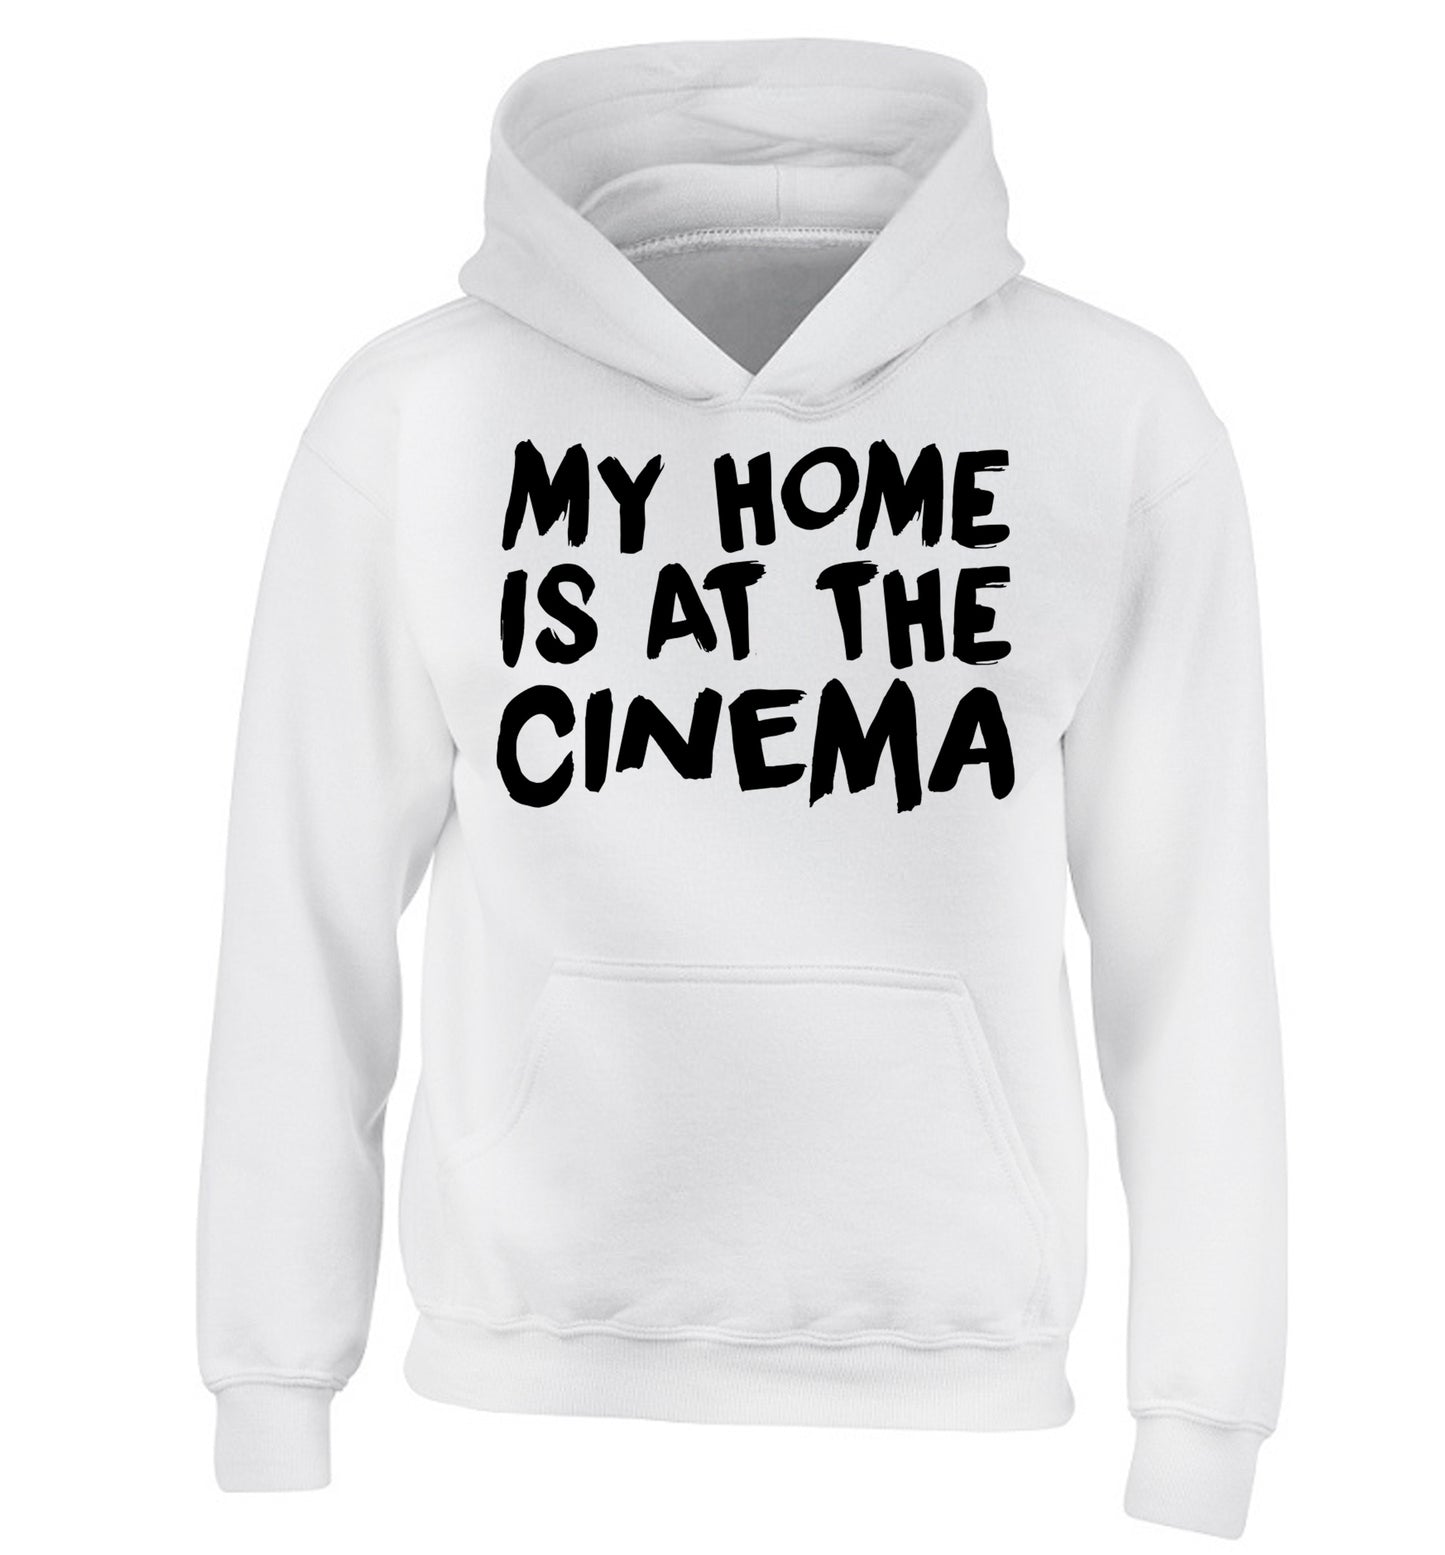 My home is at the cinema children's white hoodie 12-14 Years